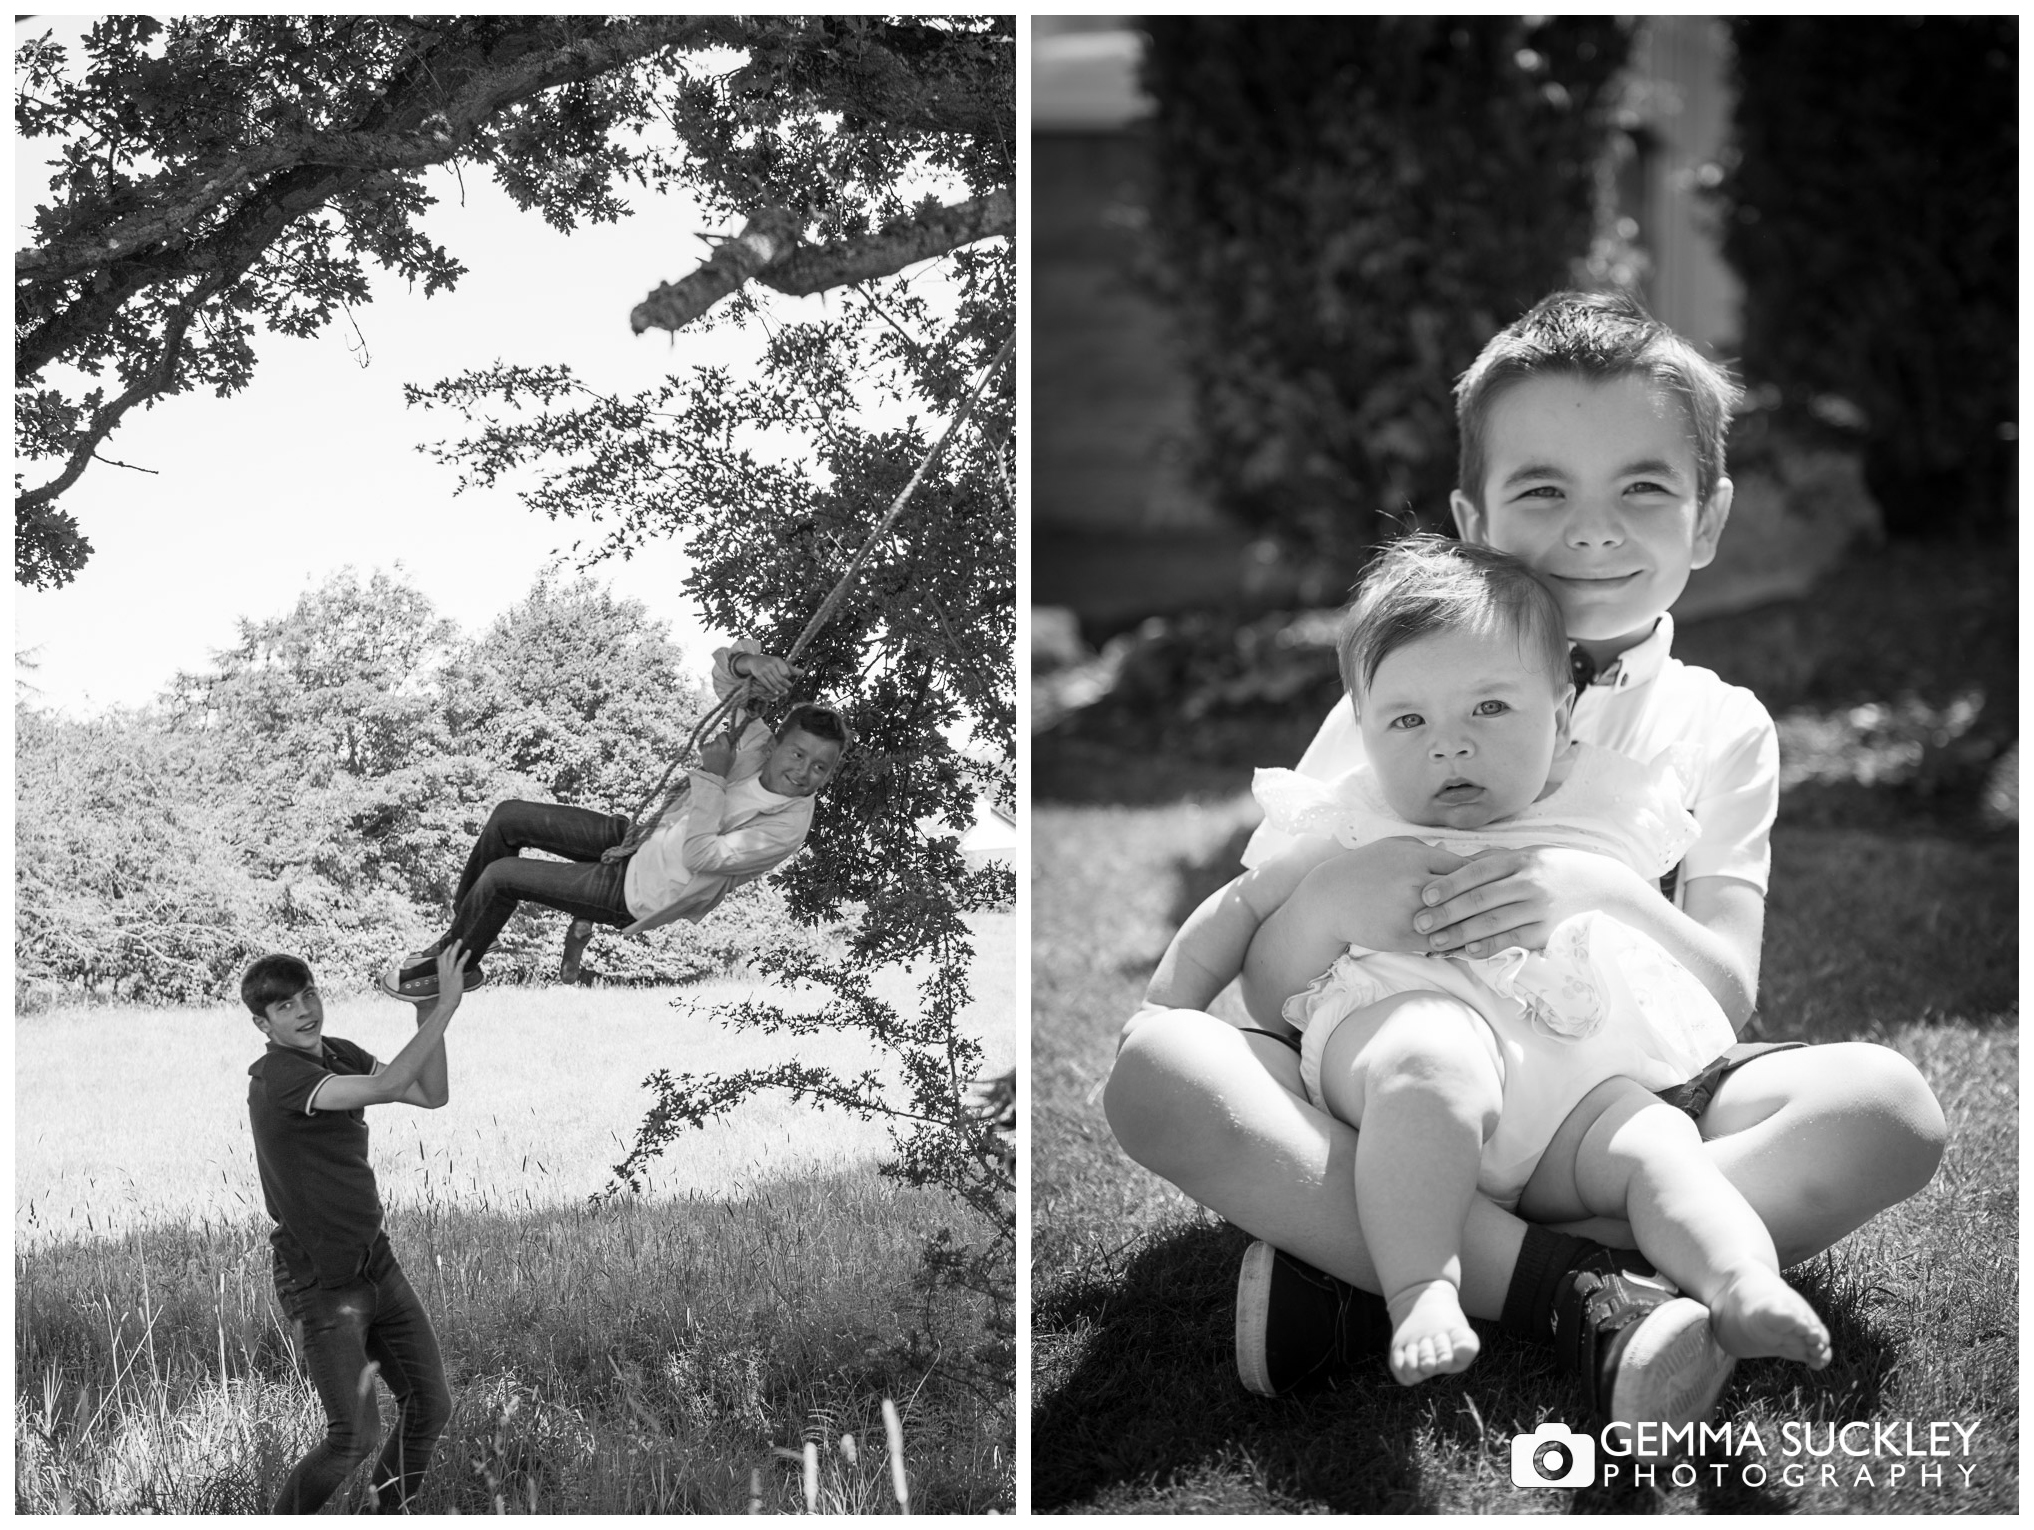 kids playing during natural outdoor family photo shoot In Menston